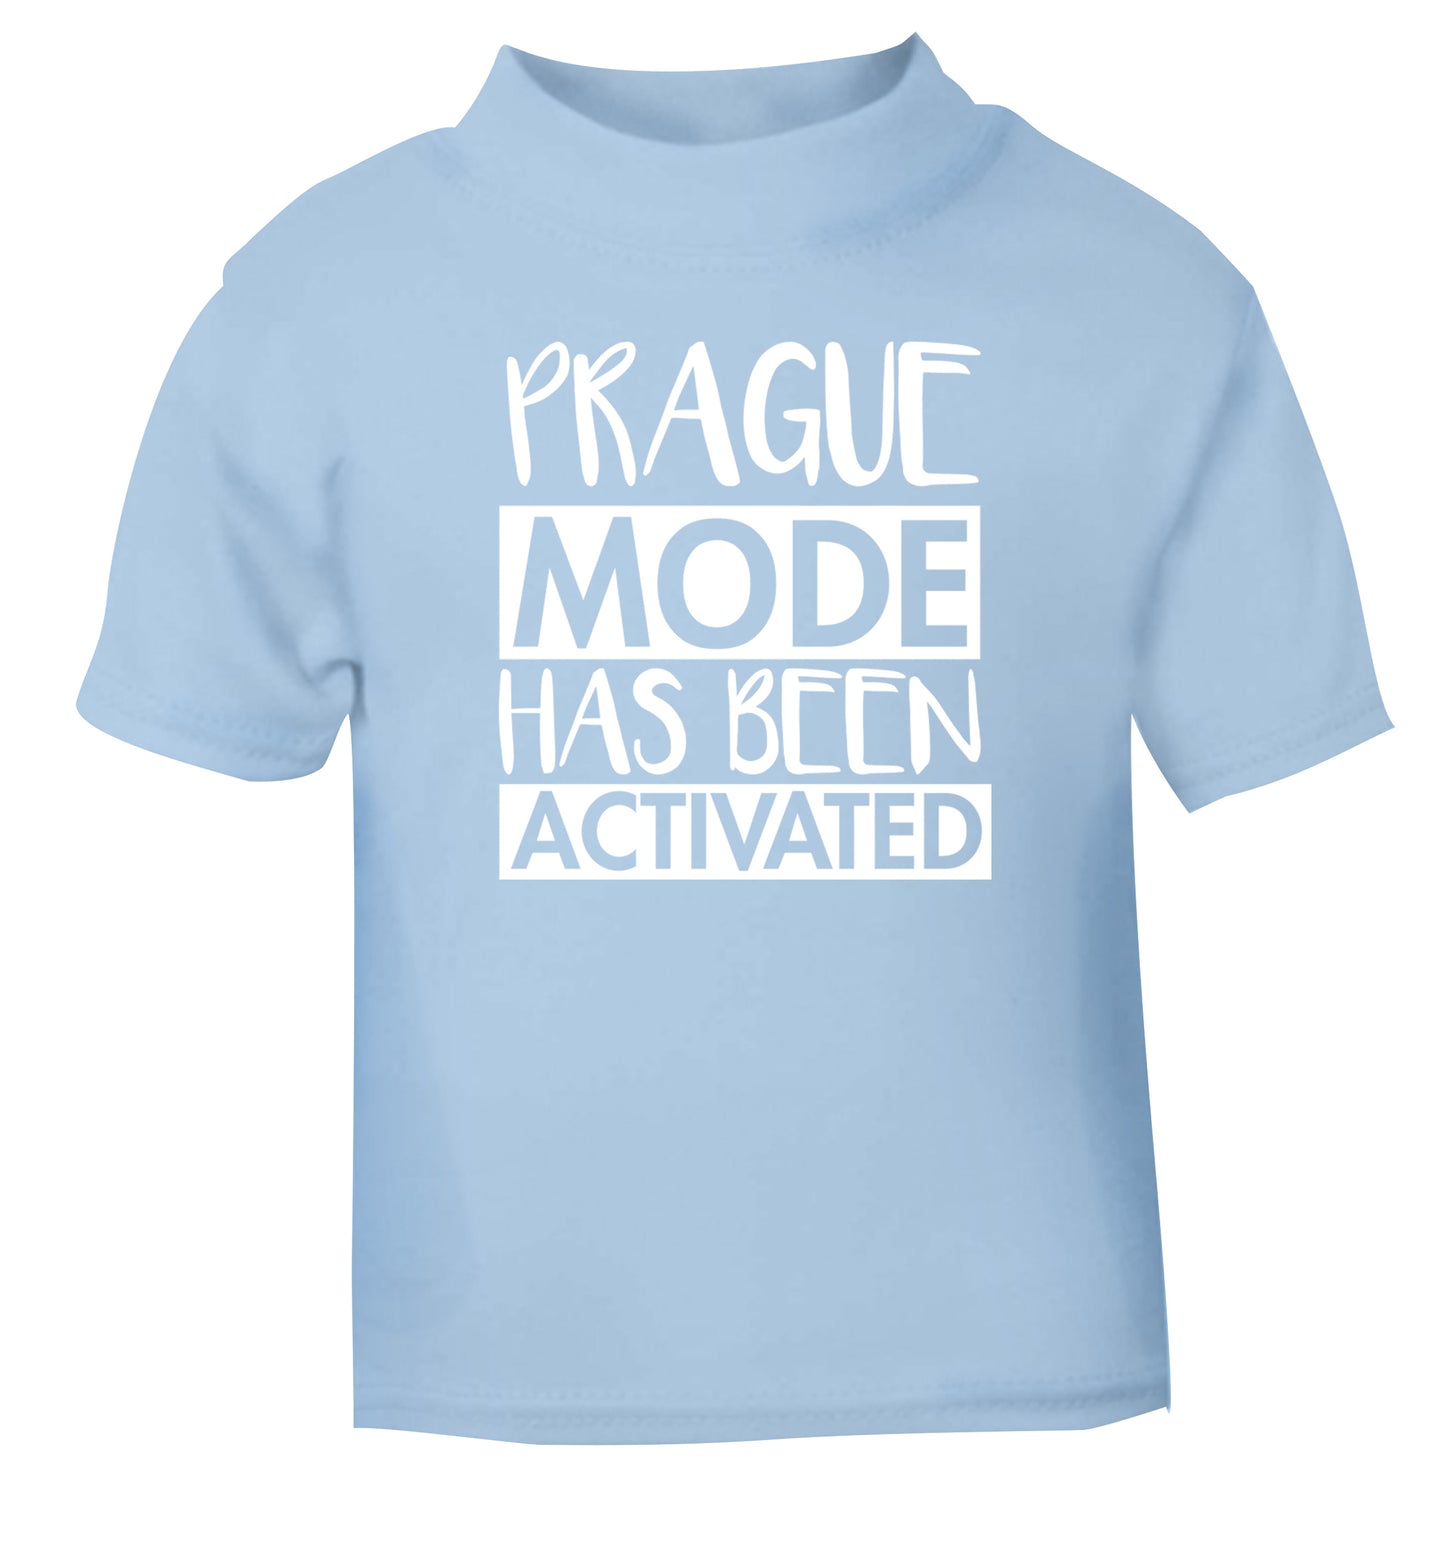 Prague mode has been activated light blue Baby Toddler Tshirt 2 Years